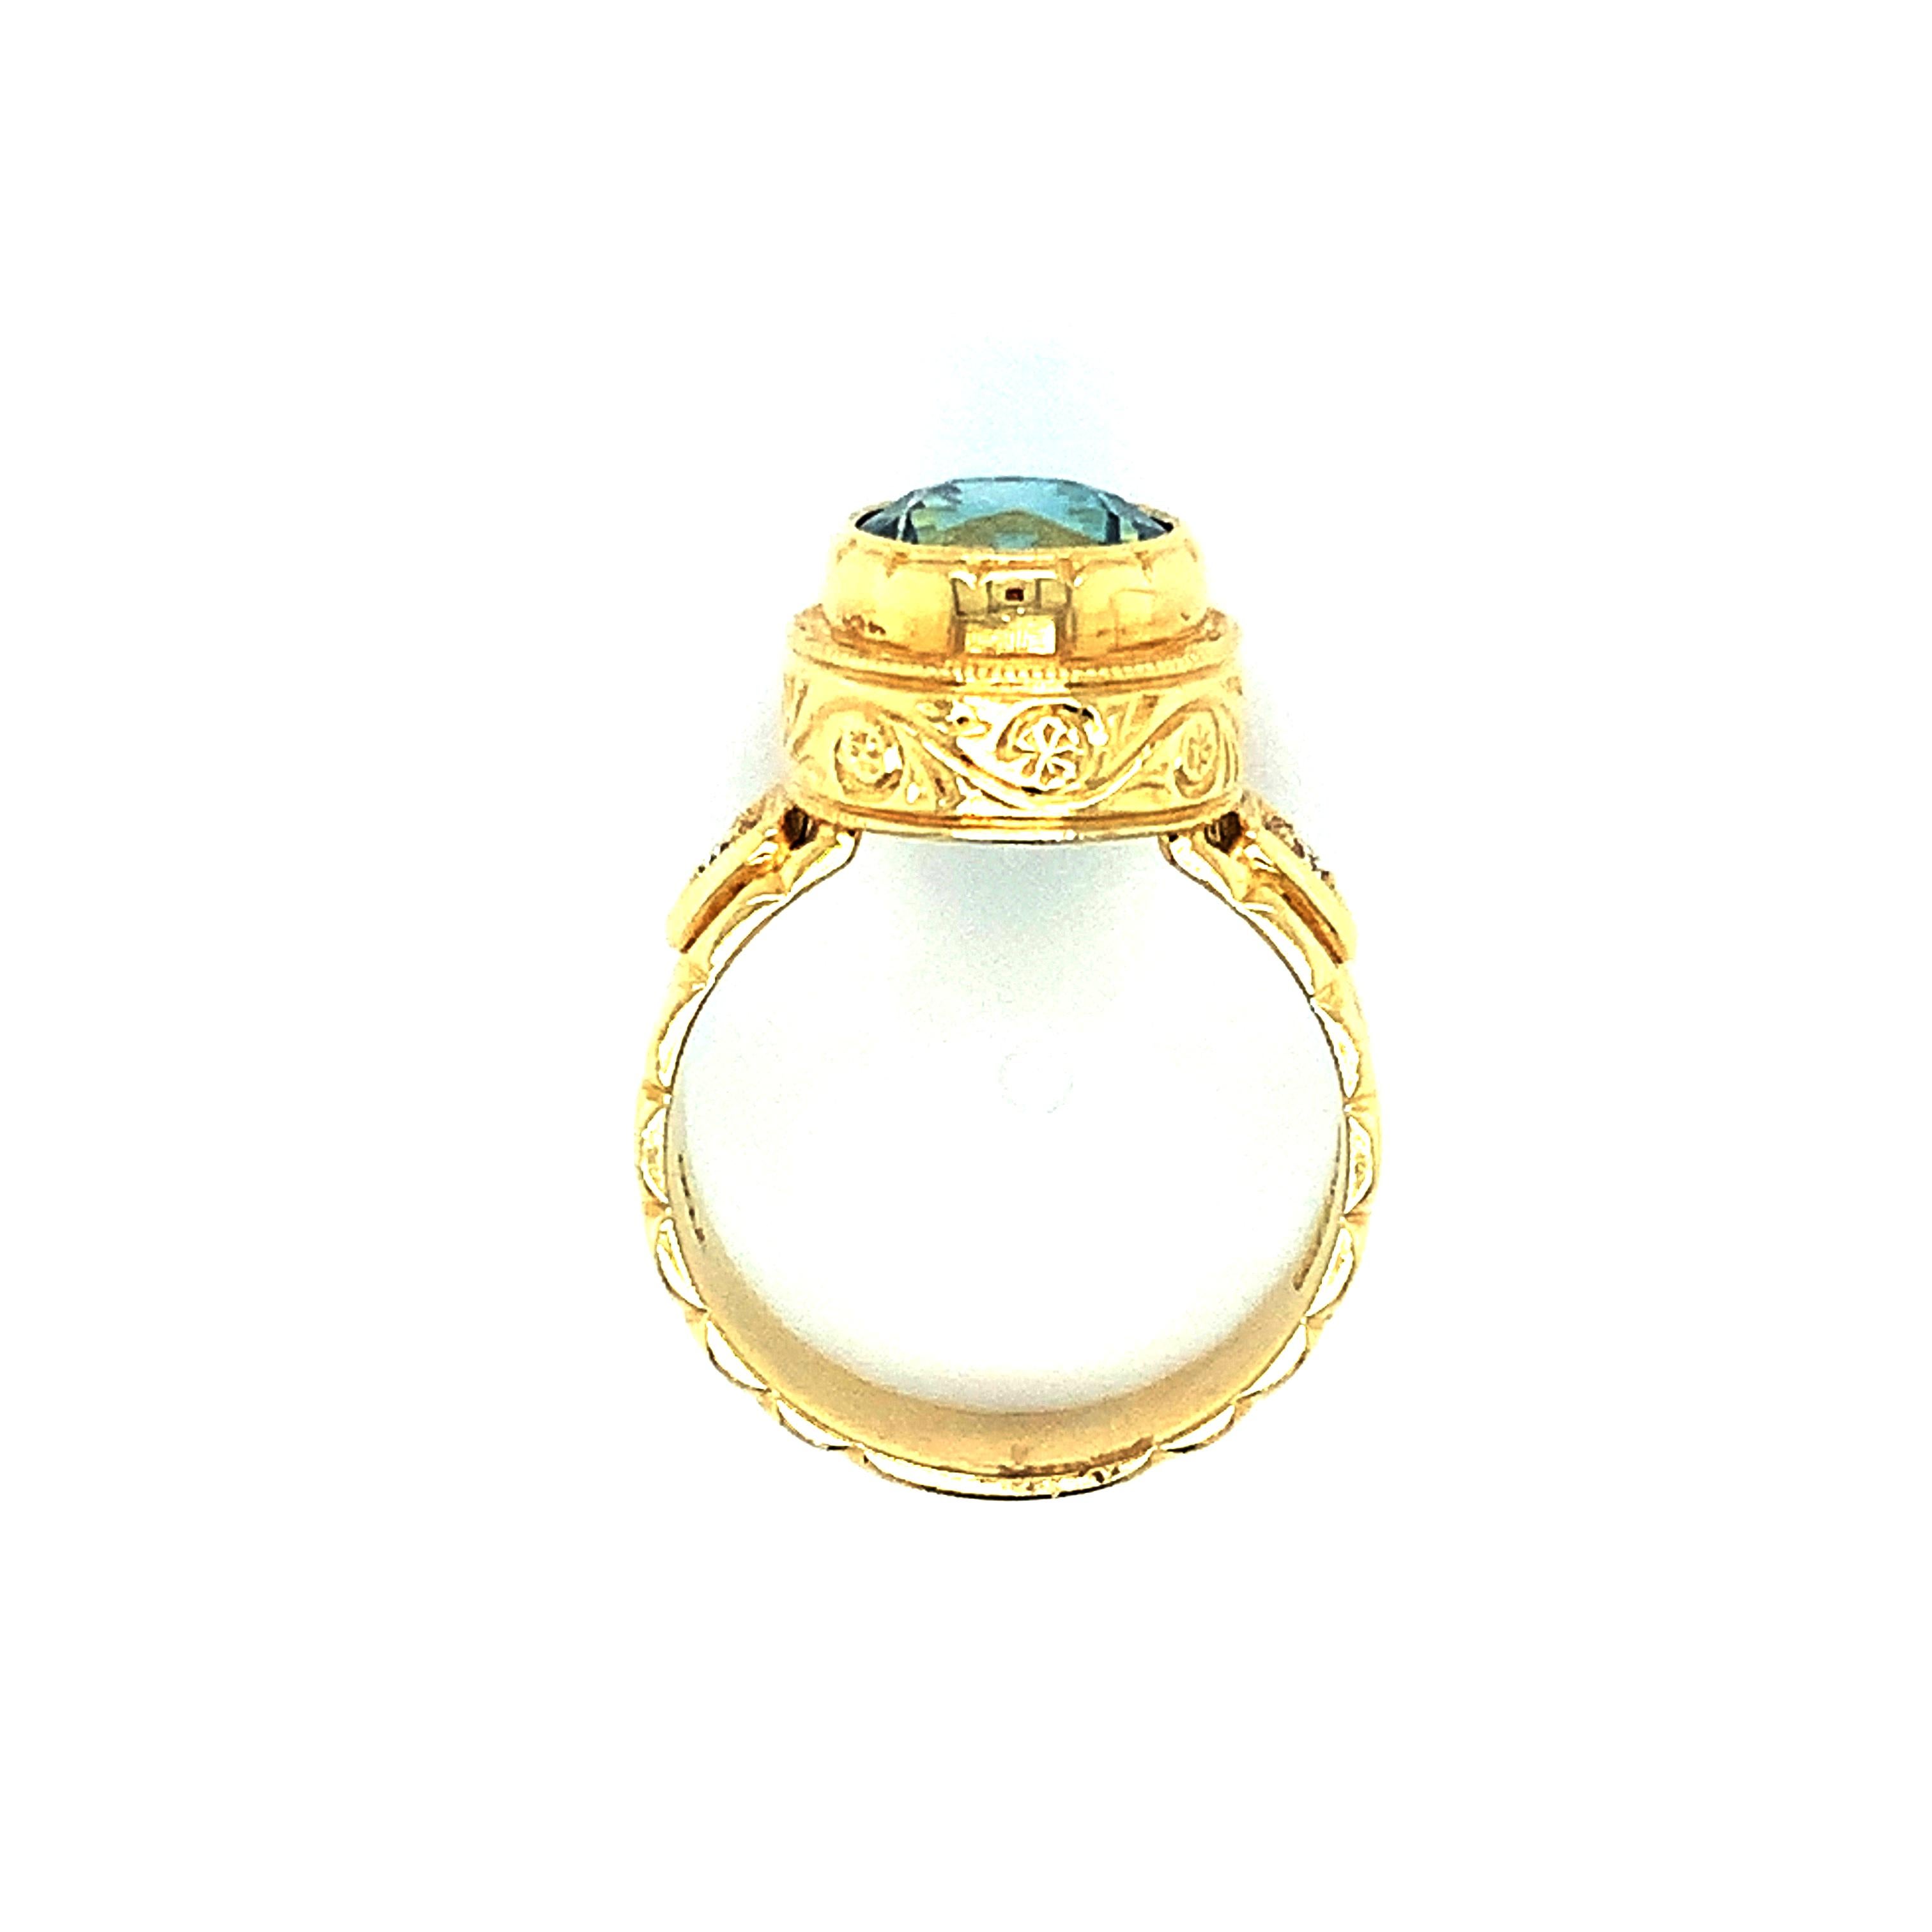 4.72 Carat Blue Zircon and Diamond Hand-Engraved Band Ring in 18k Yellow Gold   For Sale 2